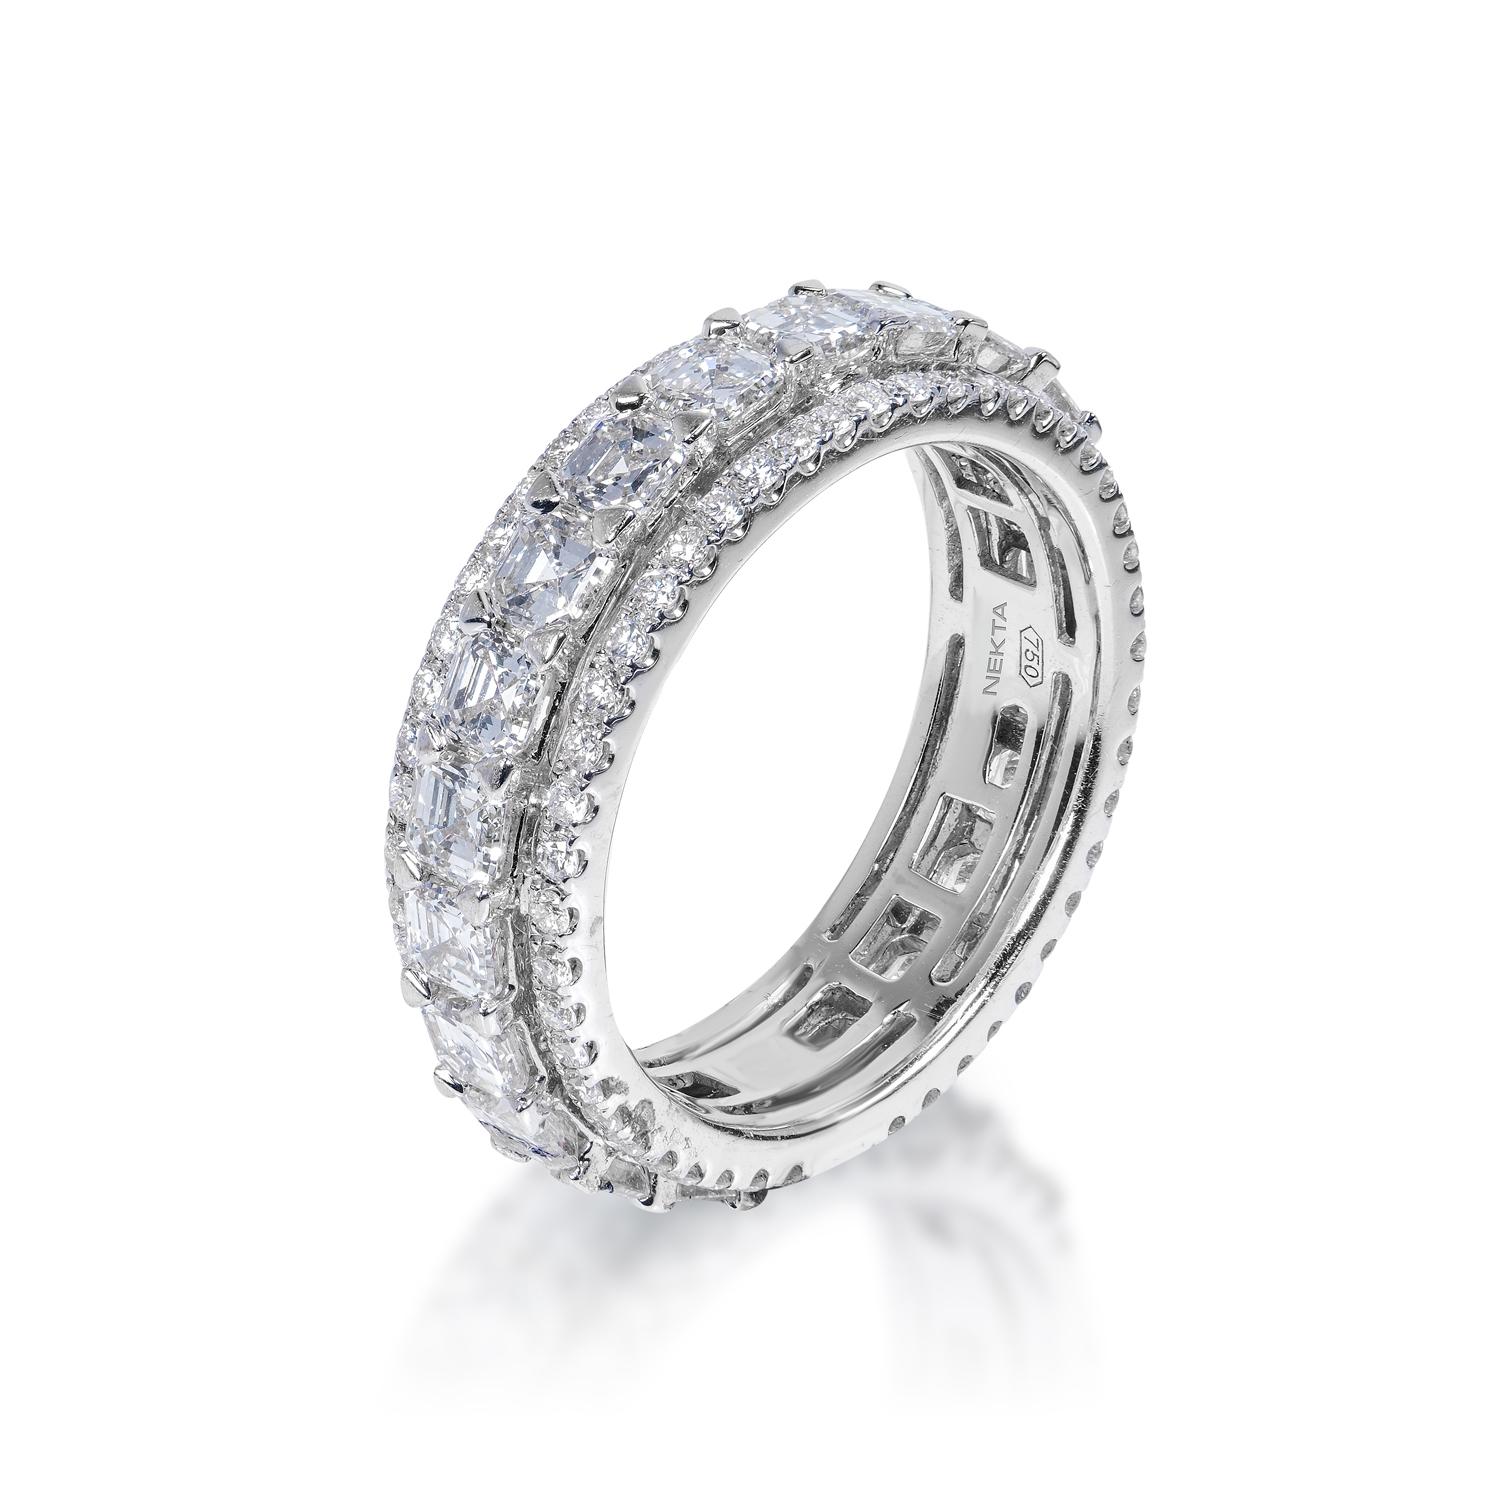 Asscher Cut eternity band with micropave round diamonds on the edges

Diamond:
Carat Weight: 3.98 Carats
Style: Asscher Cut

Setting: Shared Prong & micro pave edges
Metal: 18 Karat White Gold

Total Carat Weight: 3.98 Carats